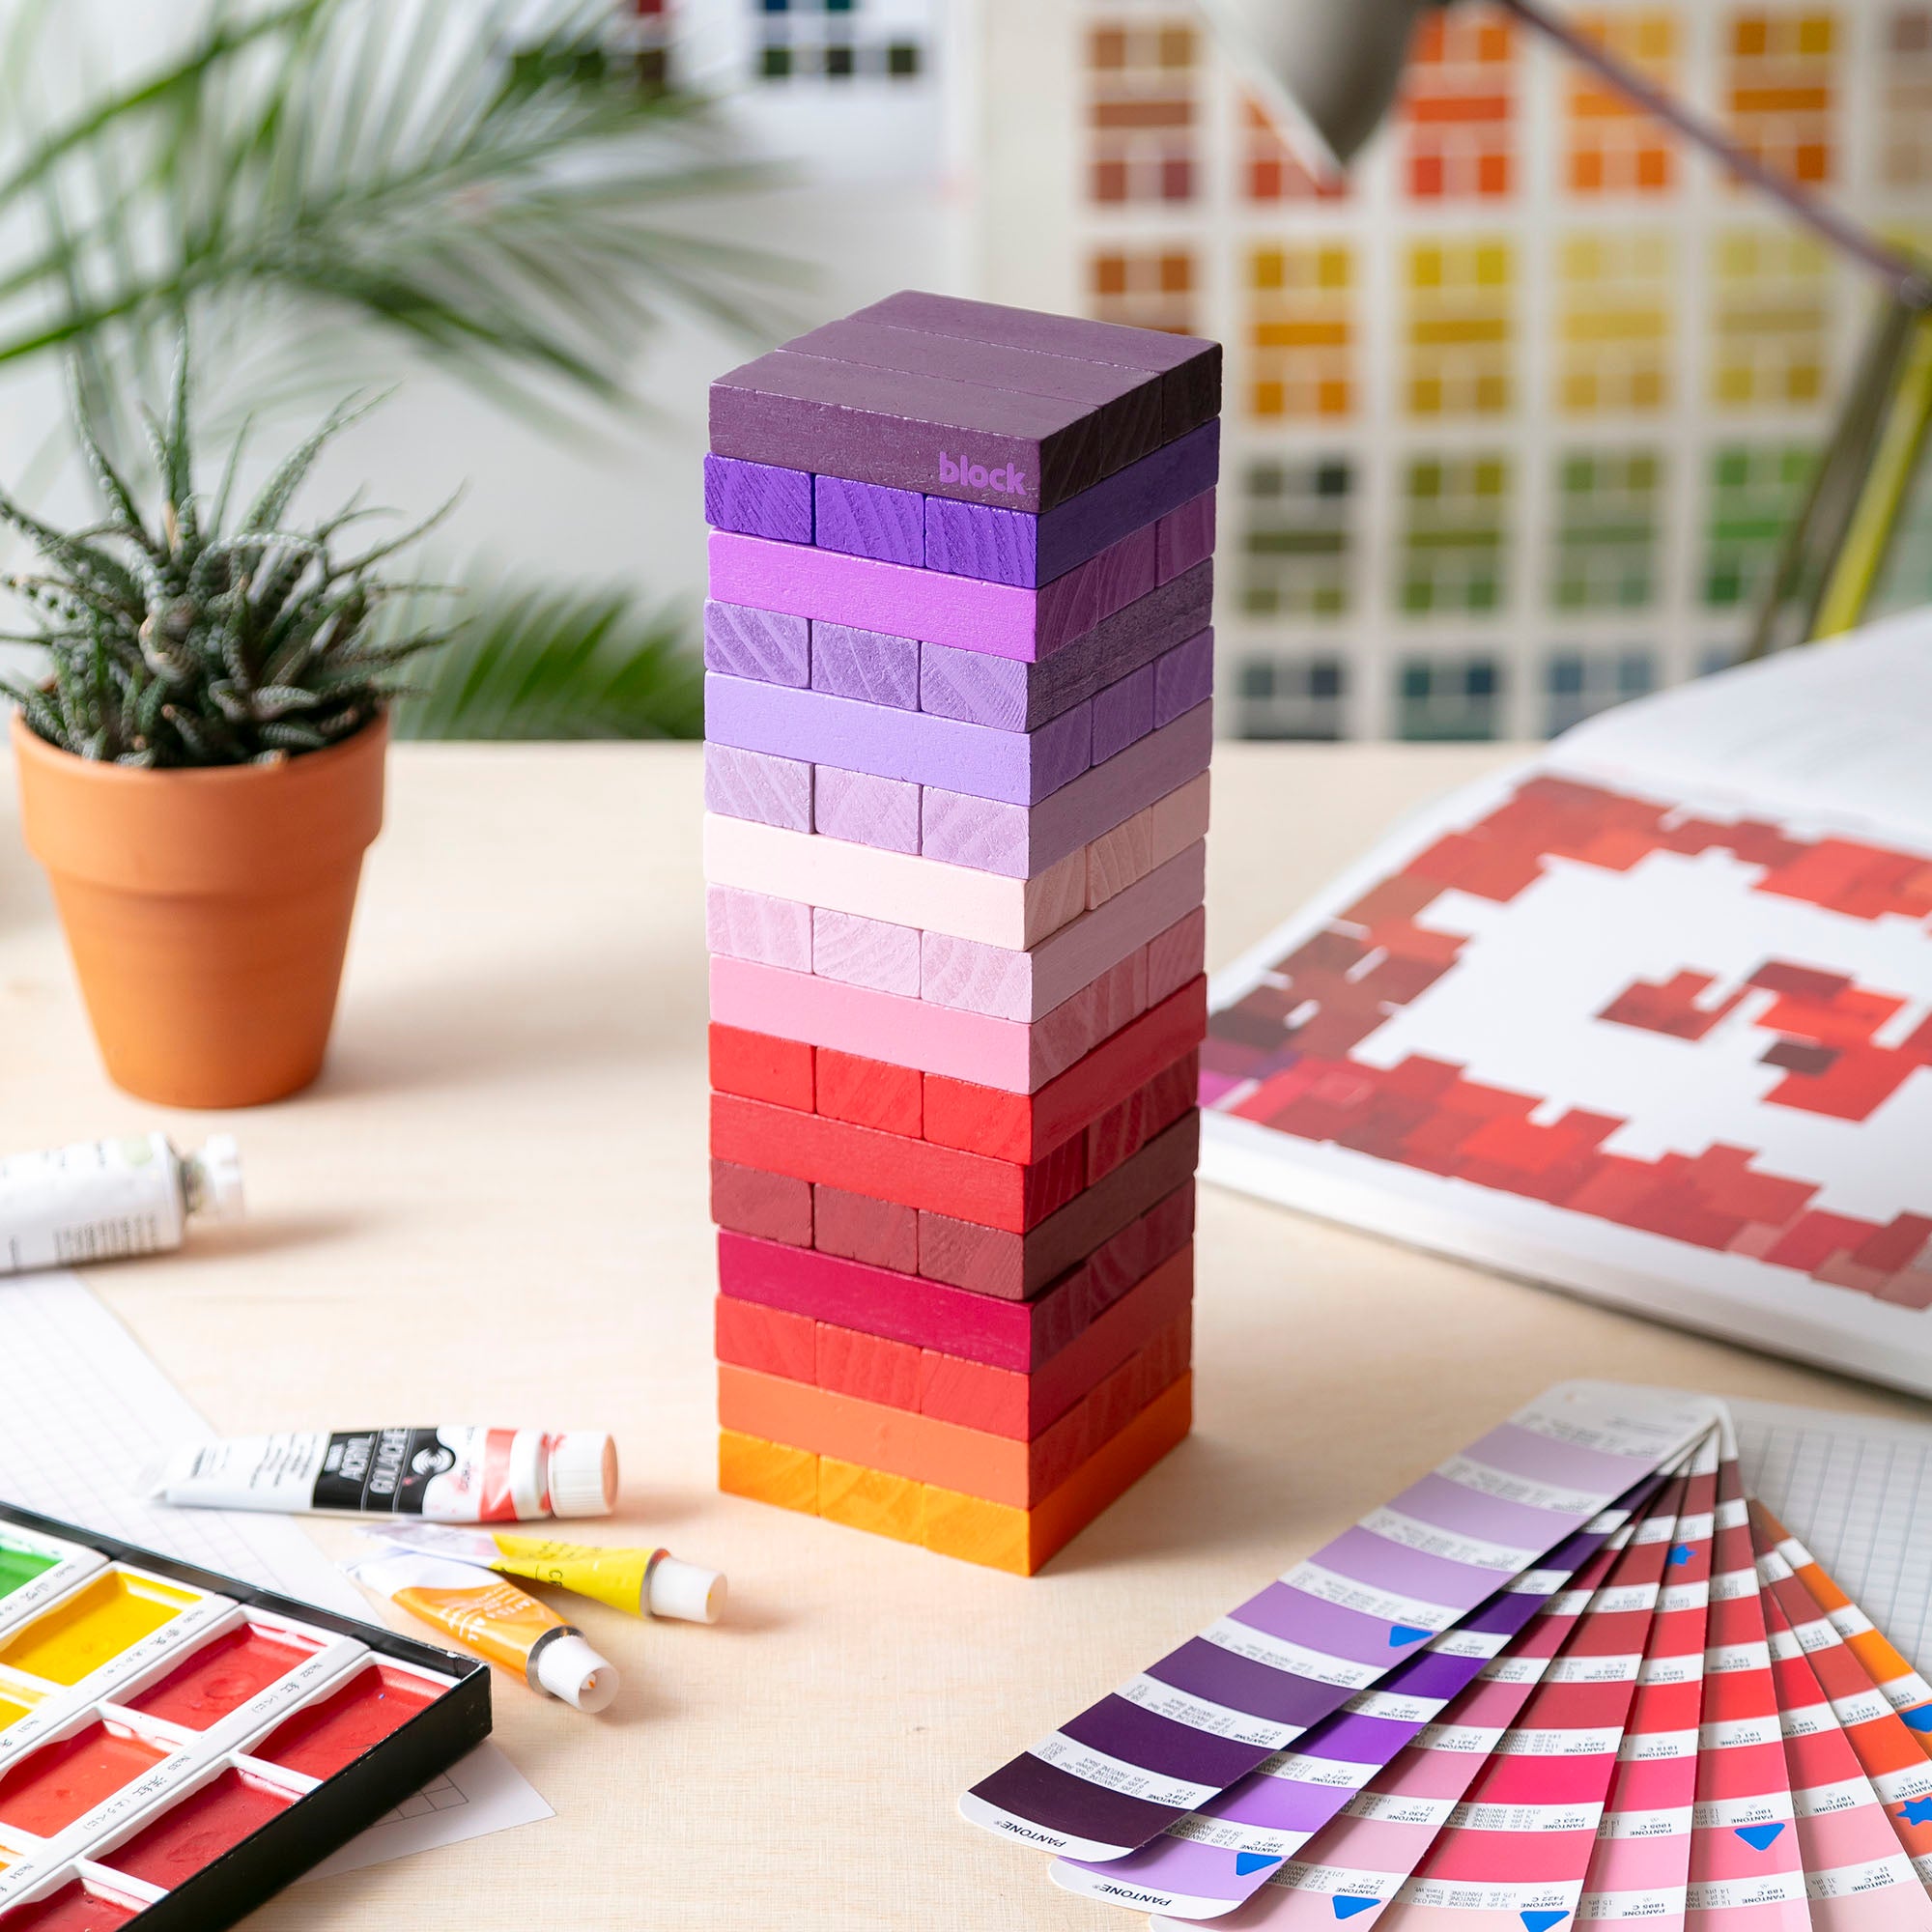 Tumbling Tower with bricks coloured in a warm gradient